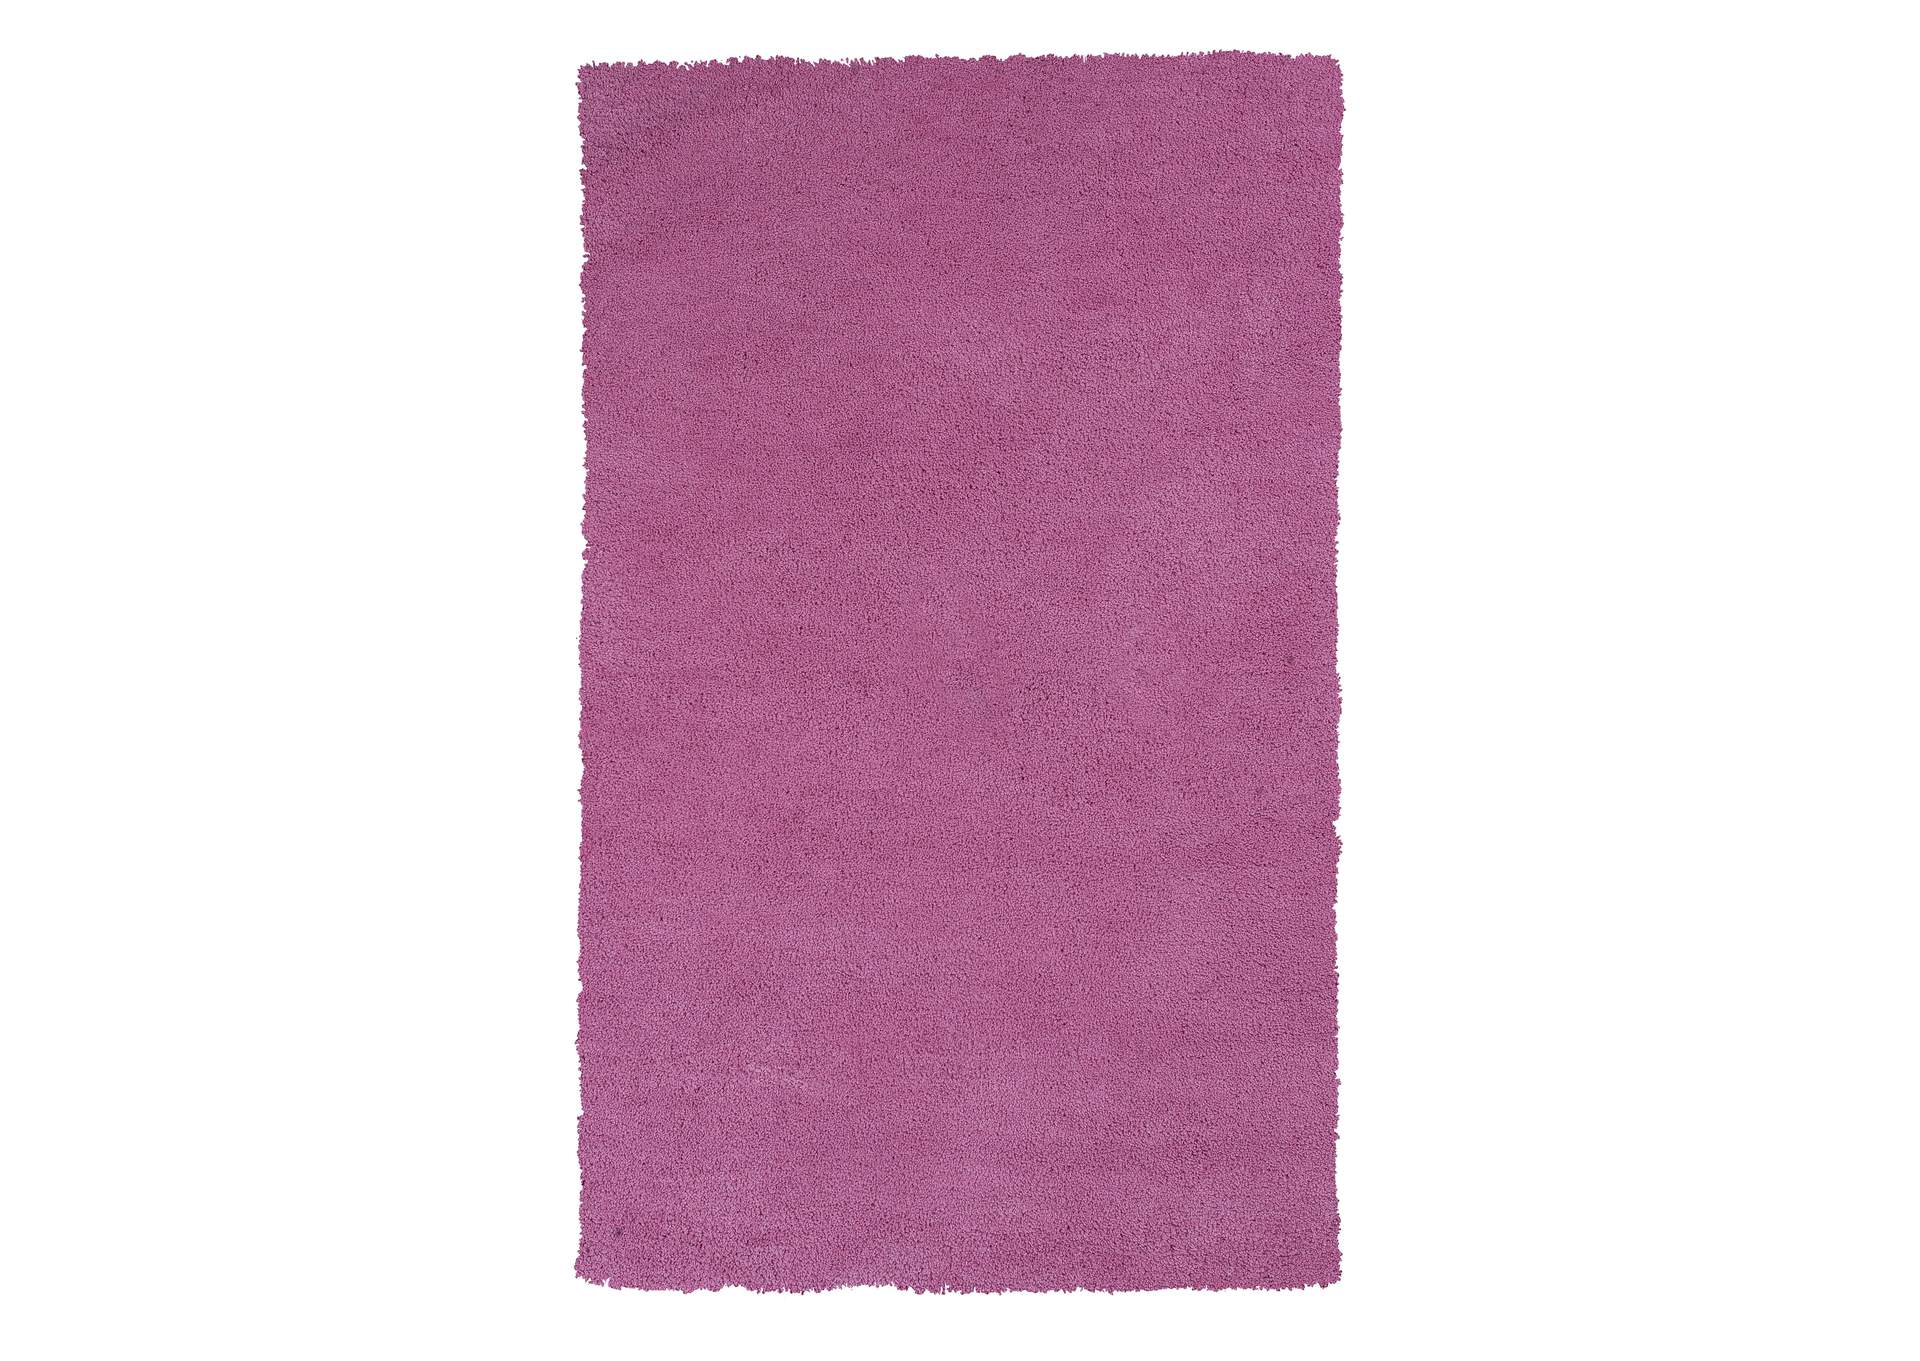 Bliss 1576 Hot Pink Shag Area 27" x 45" Rug,Kas Rugs